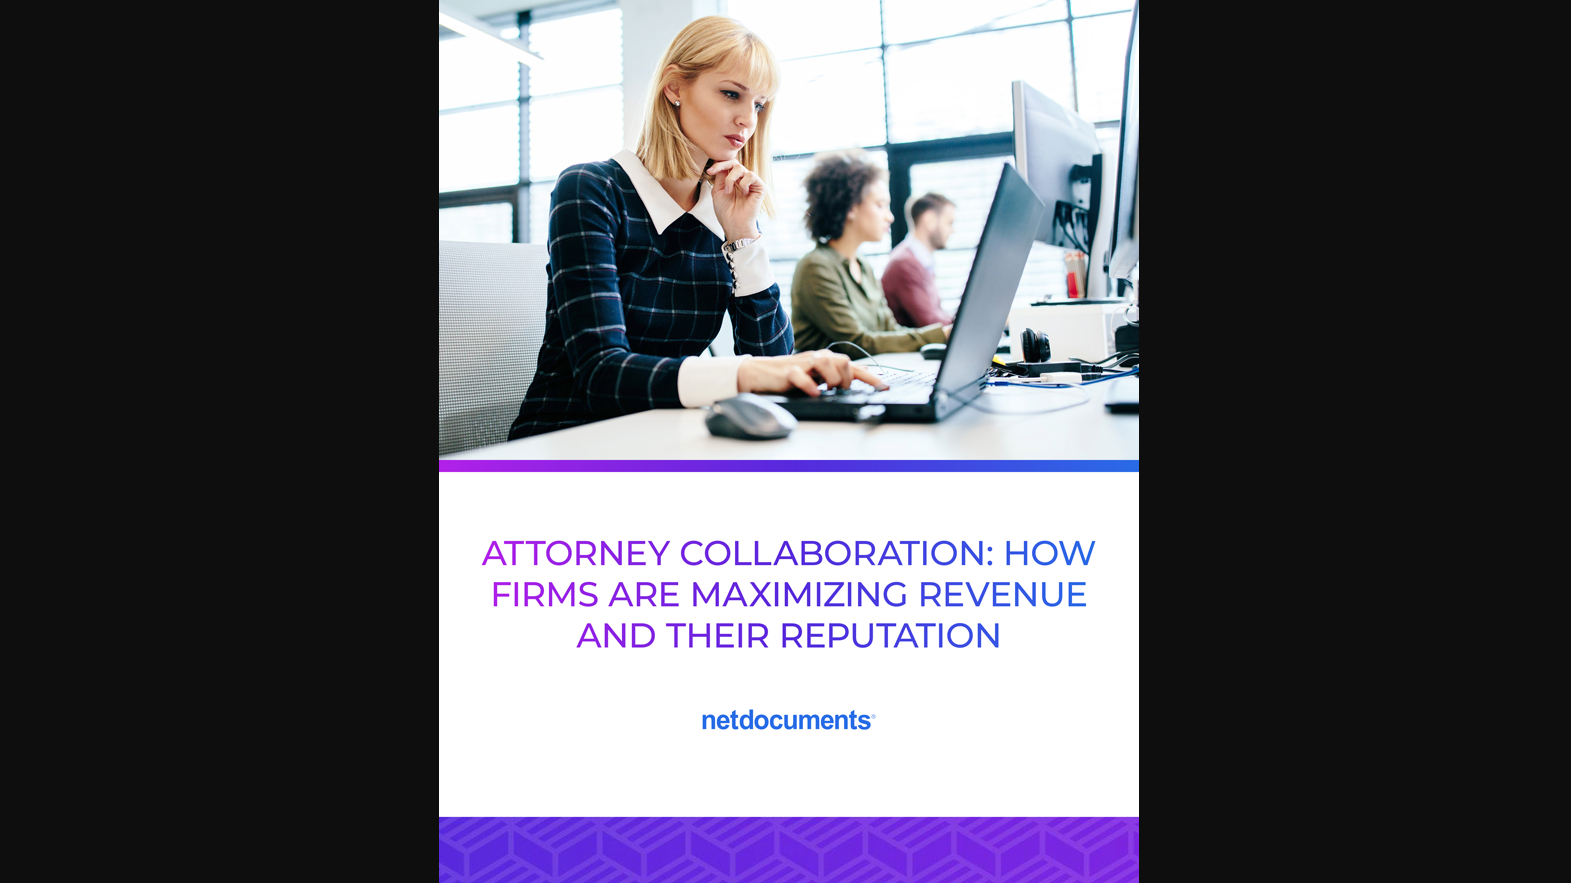 Featured Resource: How Firms Maximize Revenue and Reputation through Collaboration